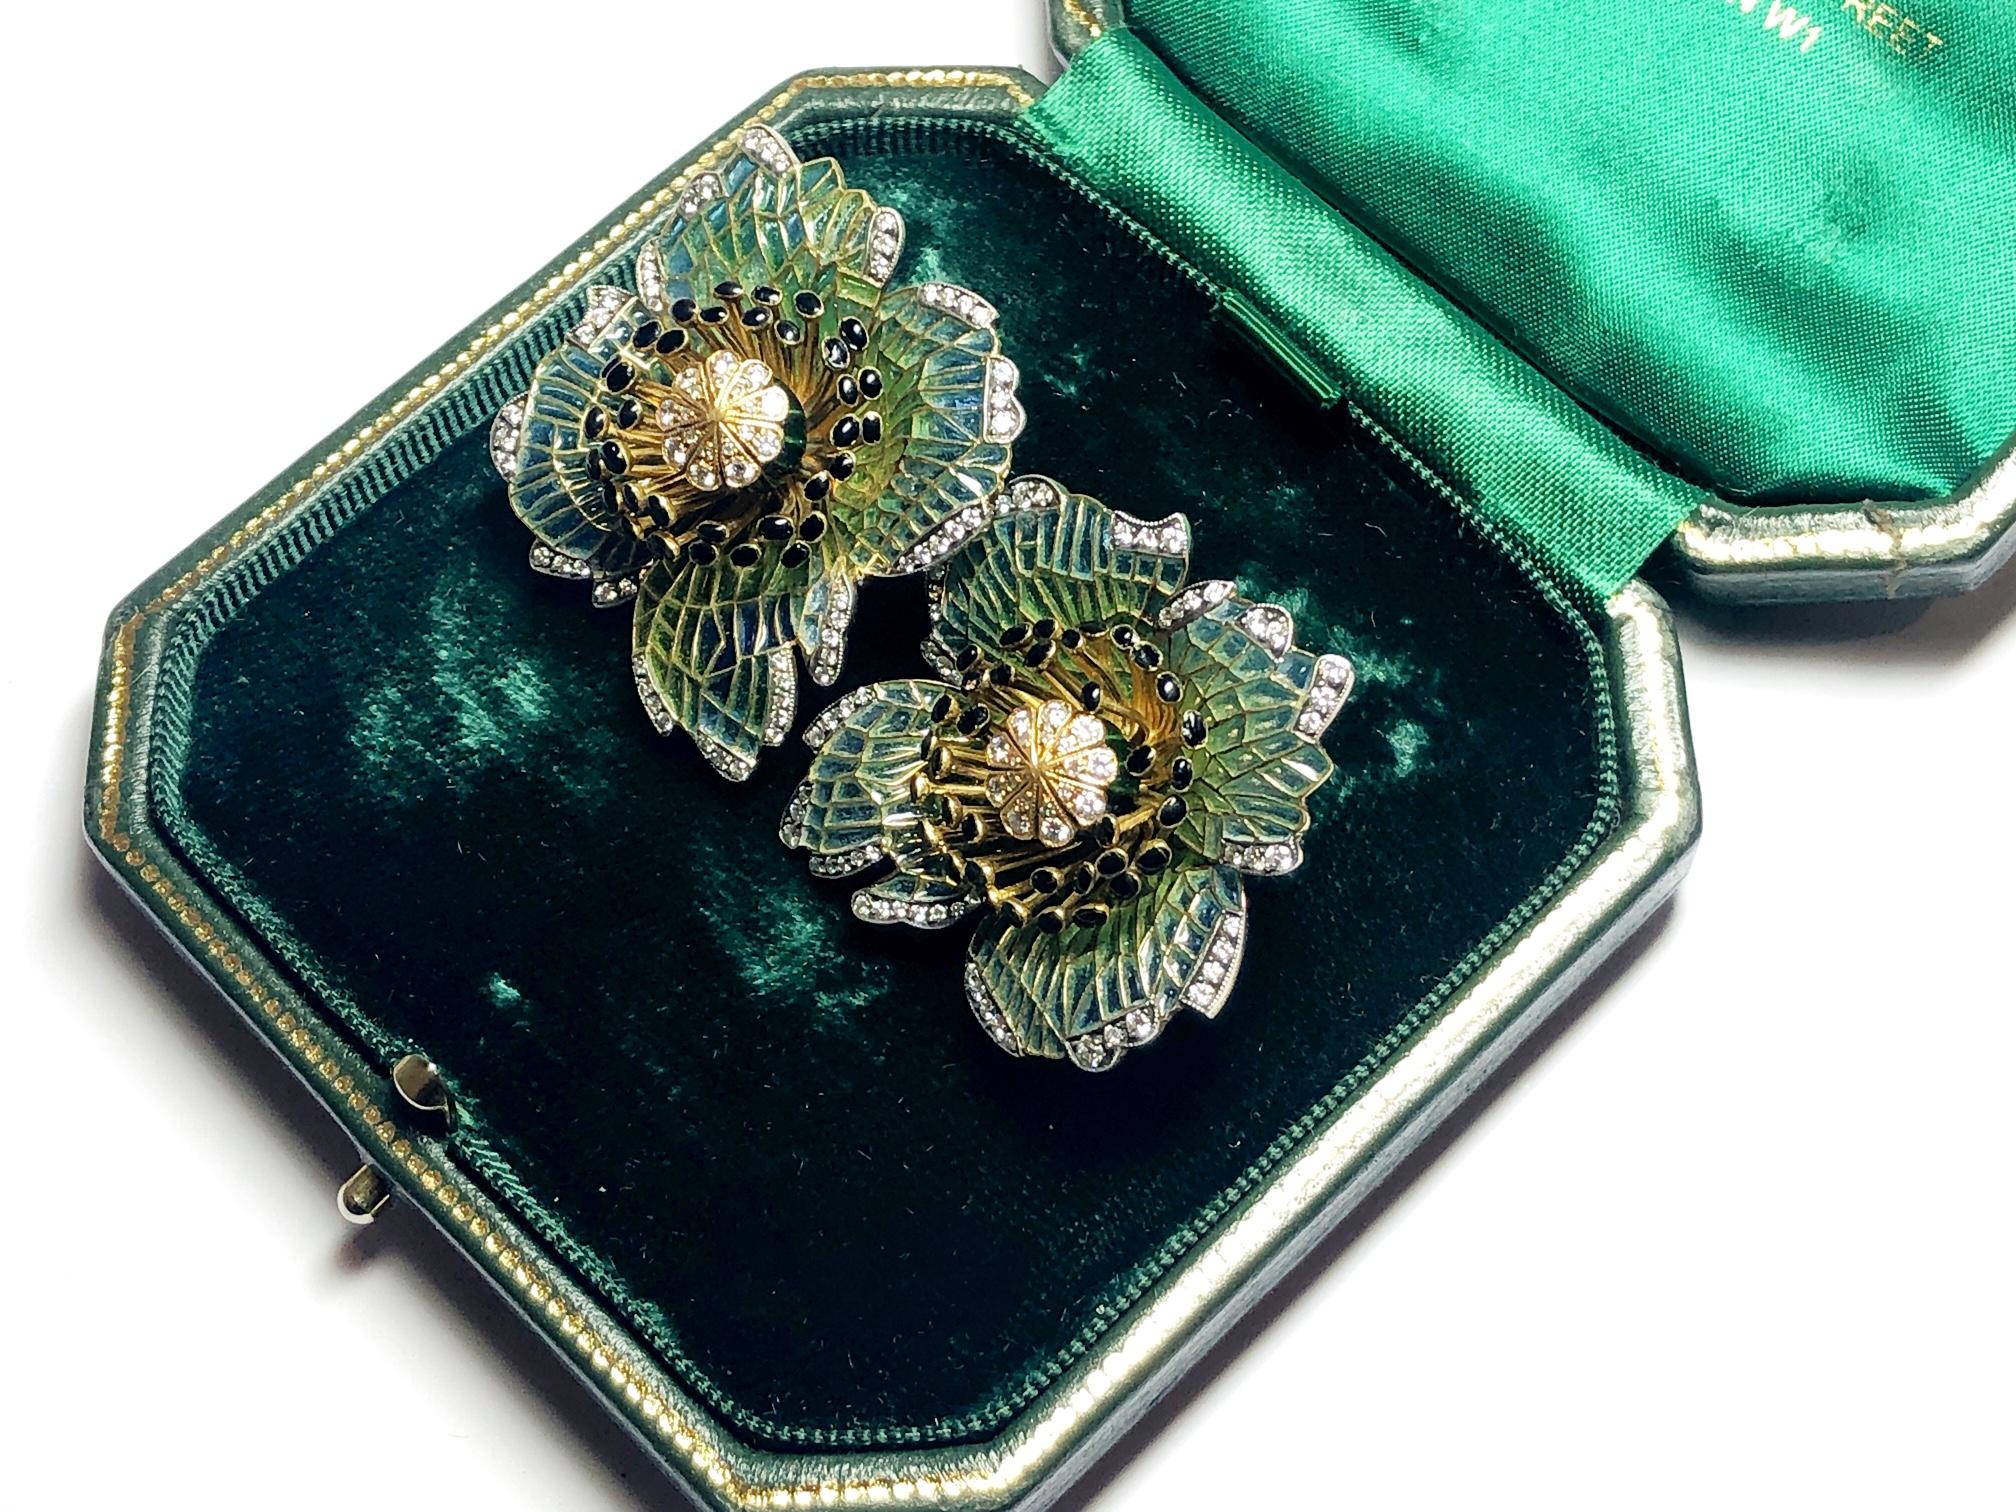 A pair of Moira poppy earrings, with blue to green plique à jour enamel petals, black enamel anthers, with a green enamelled pistil, with set with round brilliant-cut diamonds, mounted in gold, with silver settings. Signed Moira, numbered 5512, with